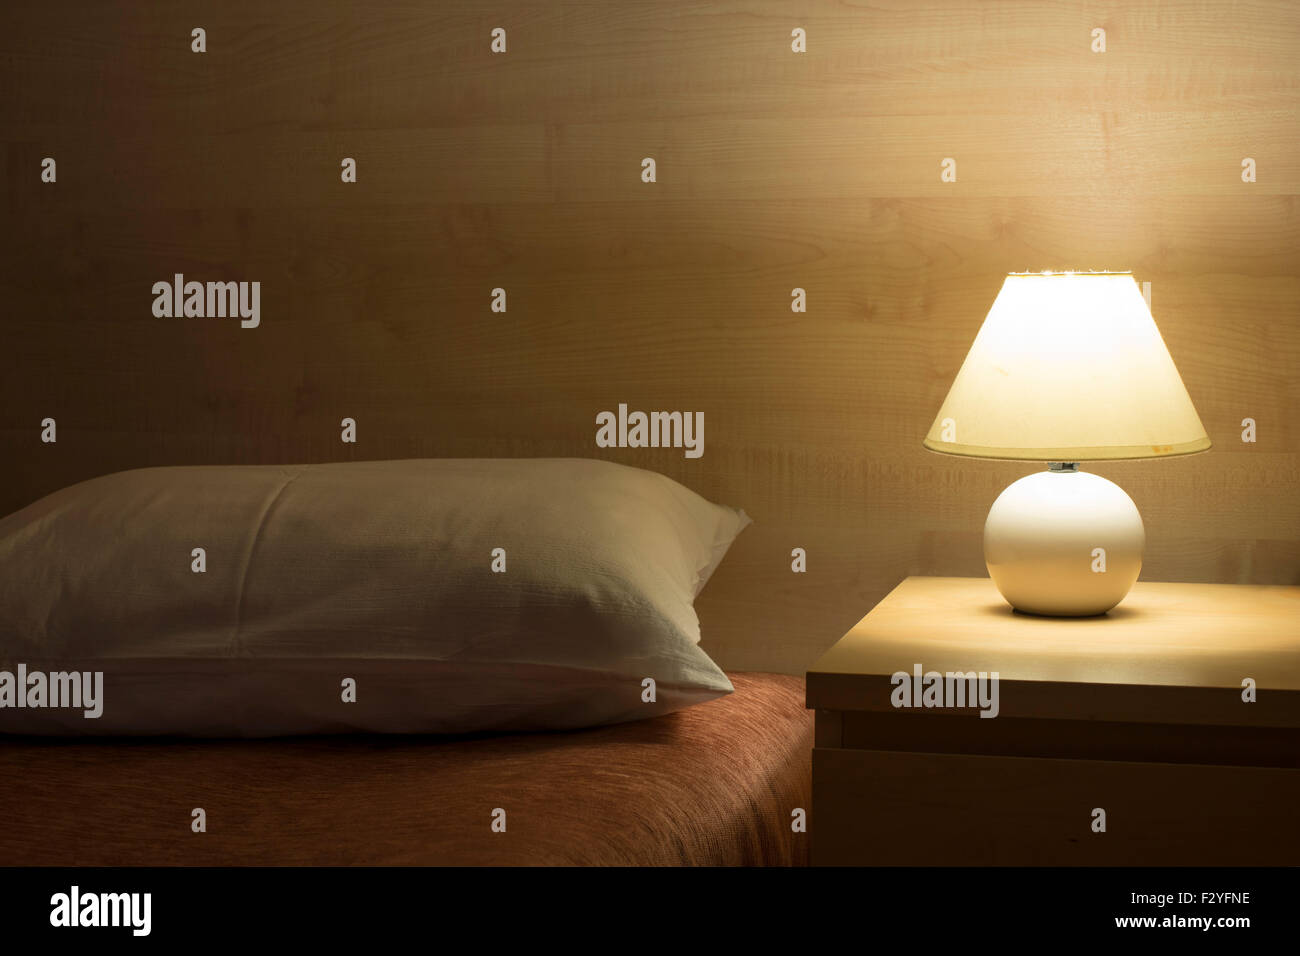 hotel room interior with illuminated bed light on wooden table Stock Photo